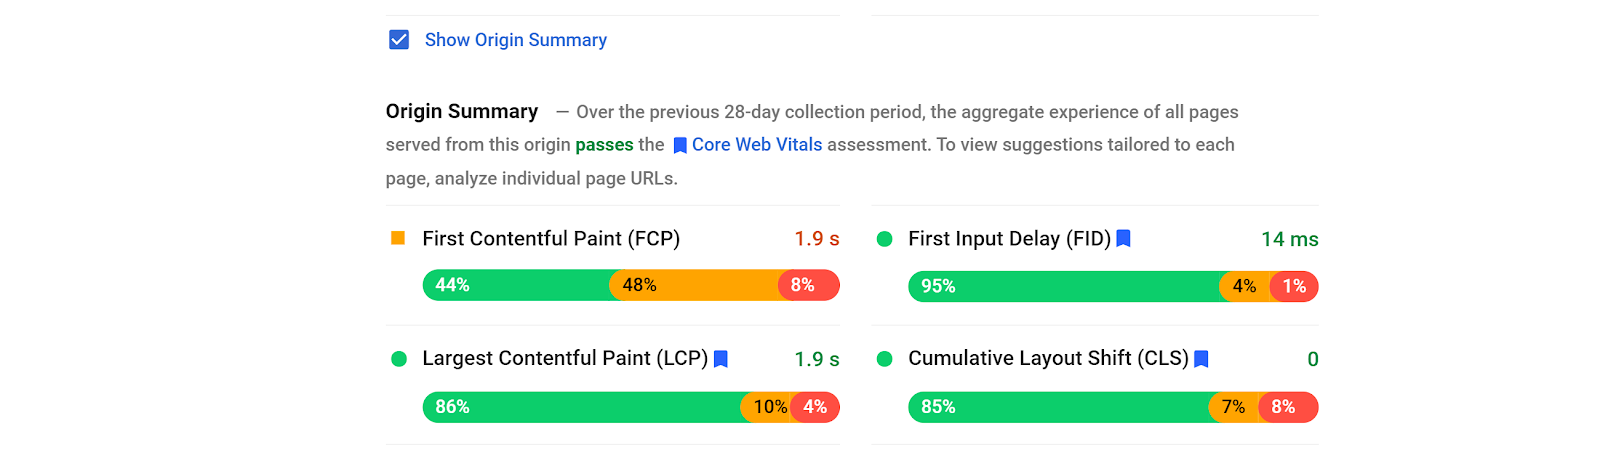 Origin Summary results shown on the PageSpeed Insights tool.